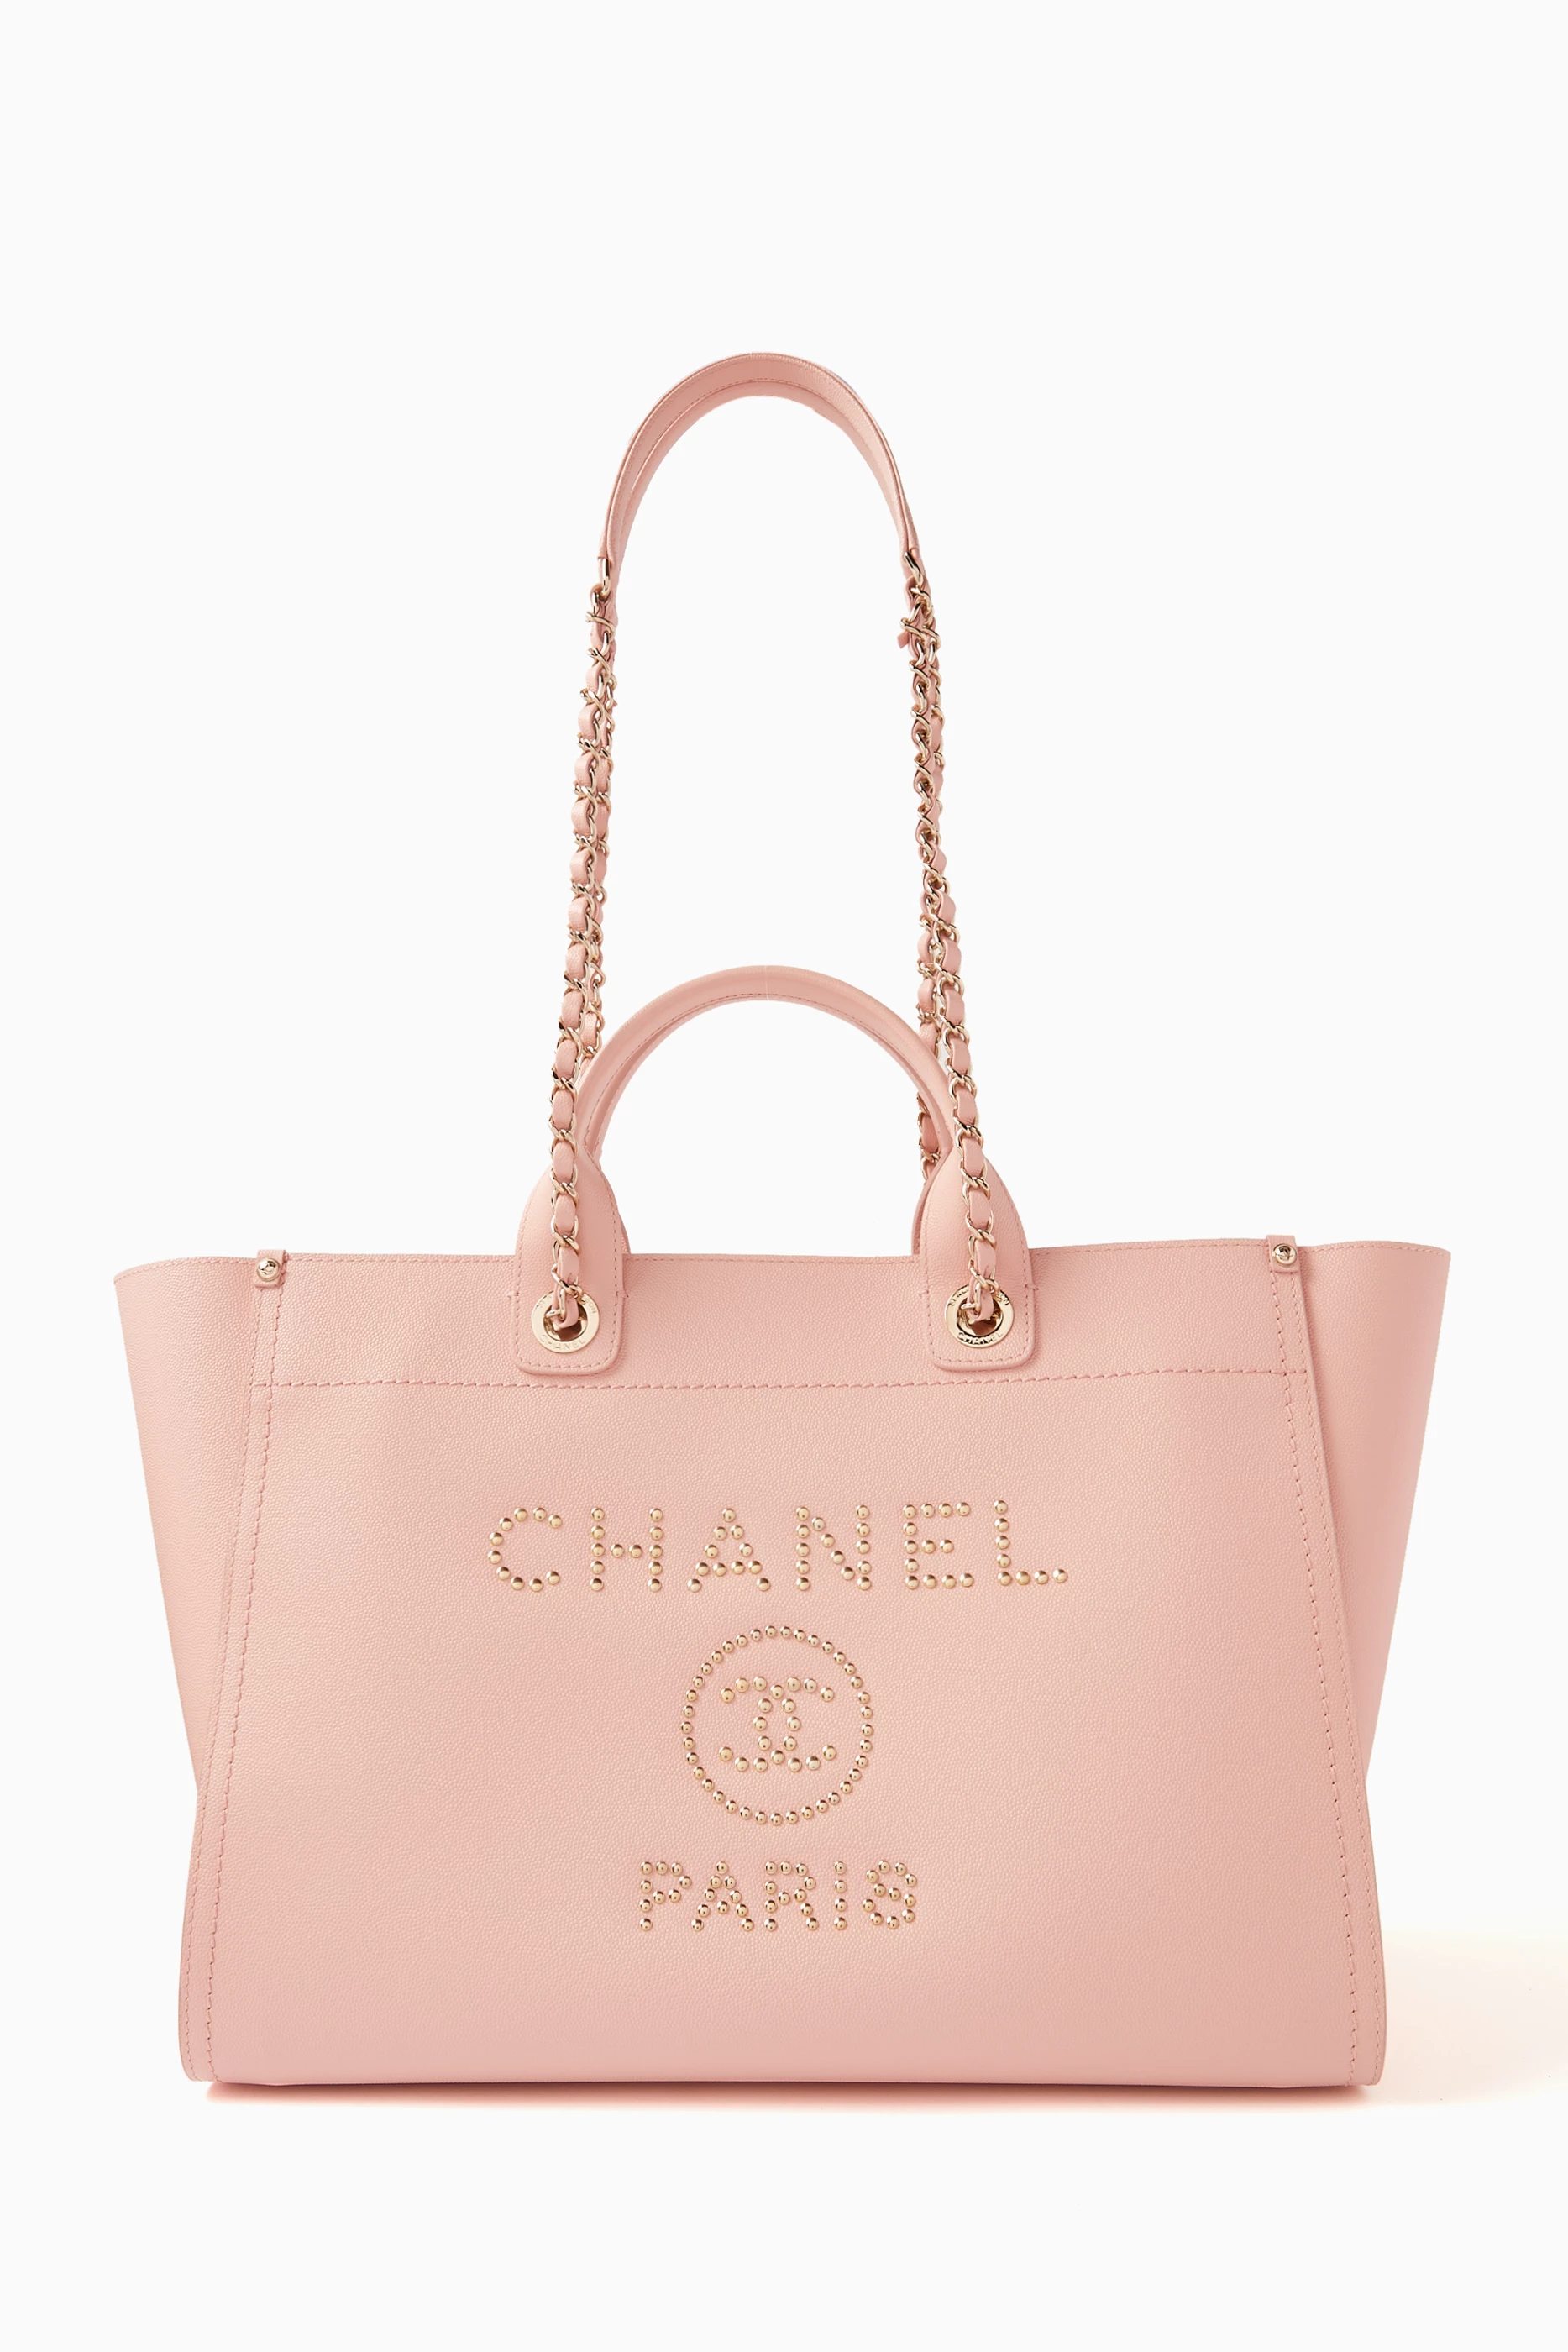 Buy Chanel Pre-Loved Pink Unused Large Deauville Tote Bag in